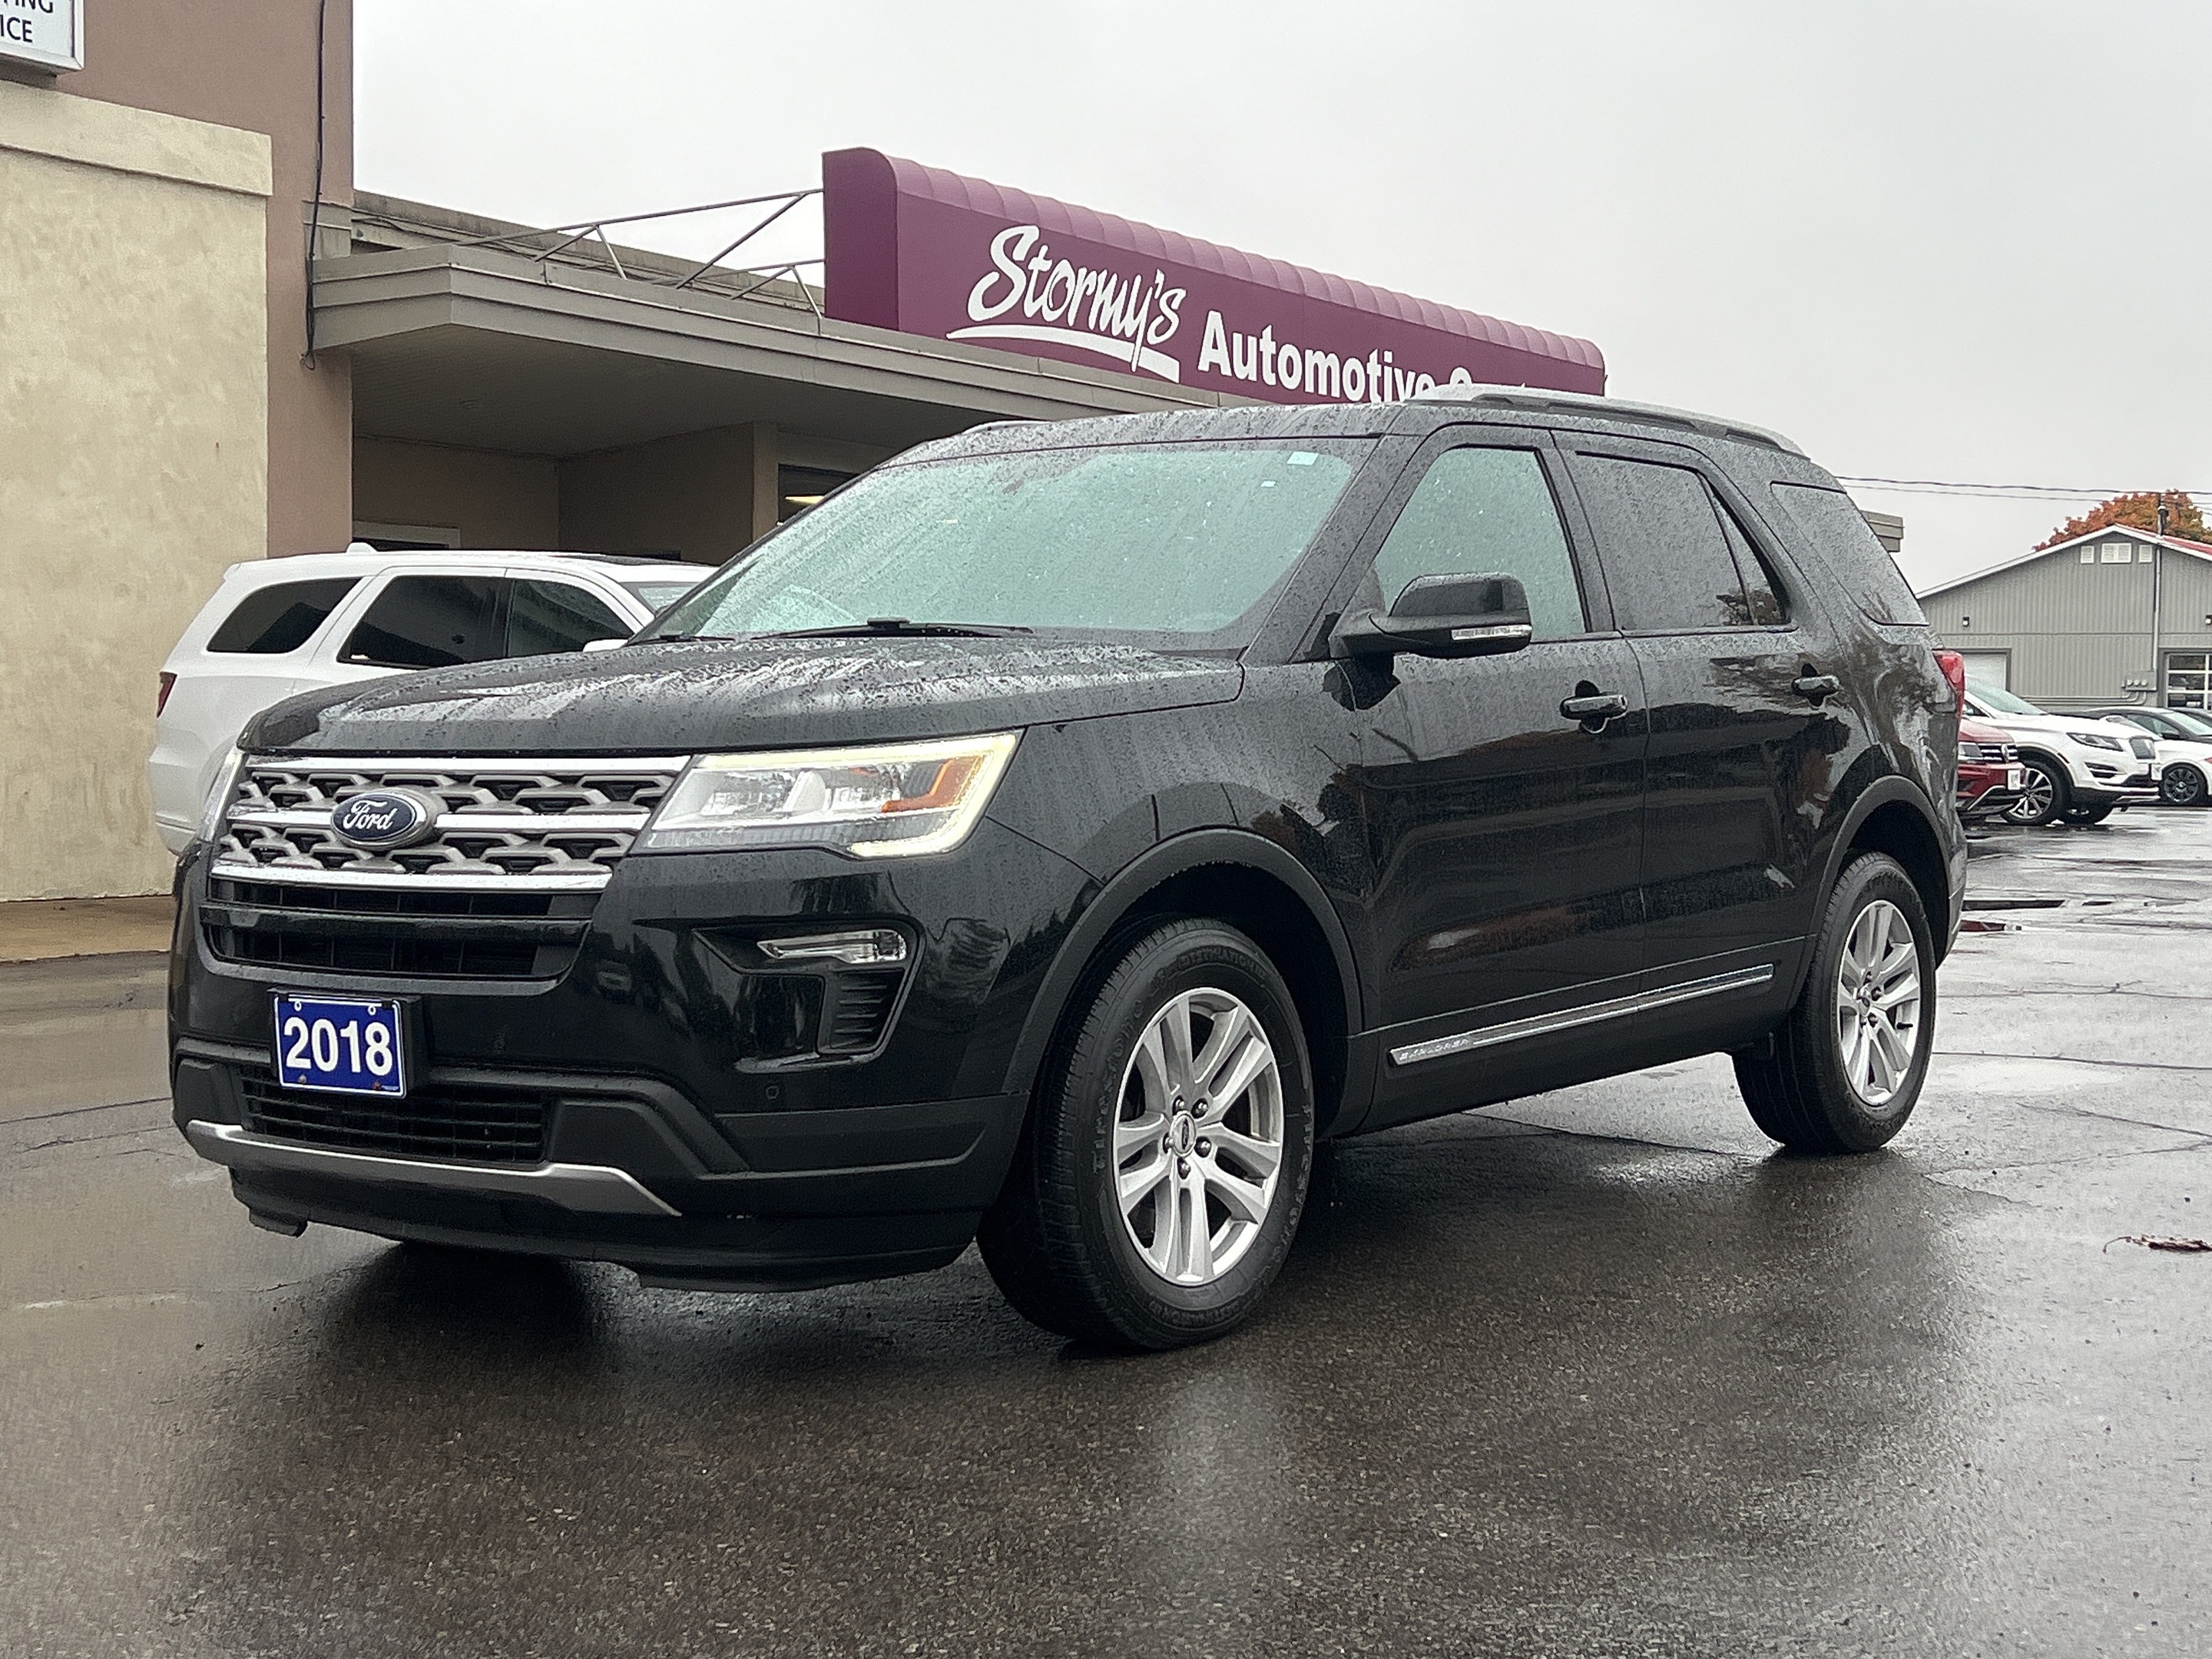 2018 Ford Explorer XLT LEATHER/REMOTE START CALL NAPANEE 613-354-2100